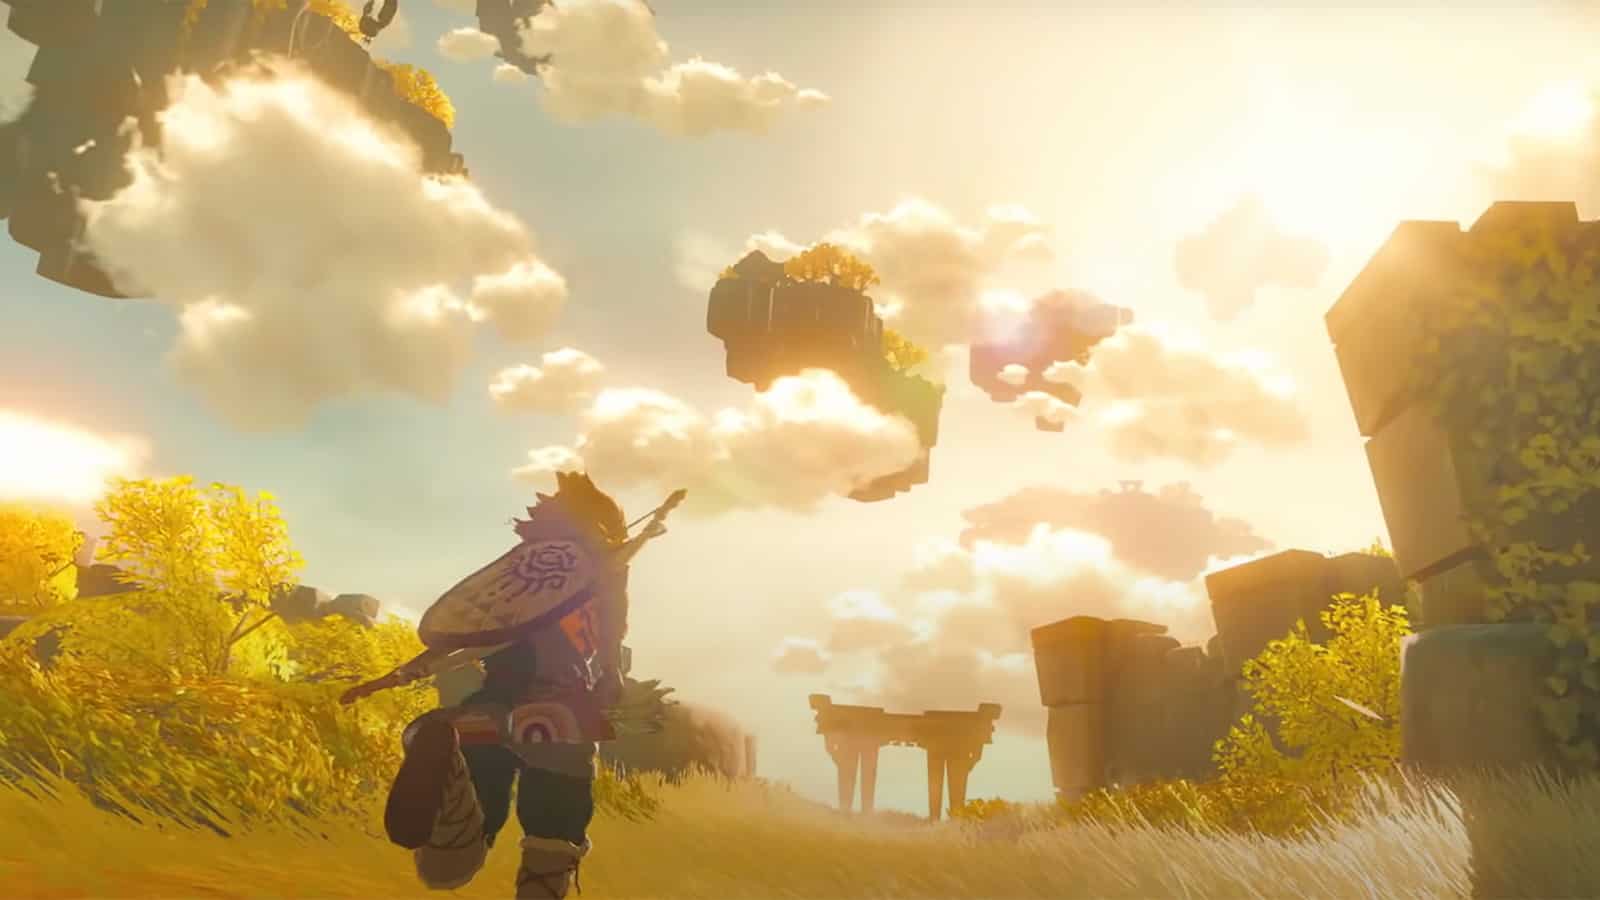 The Legend Of Zelda: Breath Of The Wild Sequel Delayed To Spring 2023